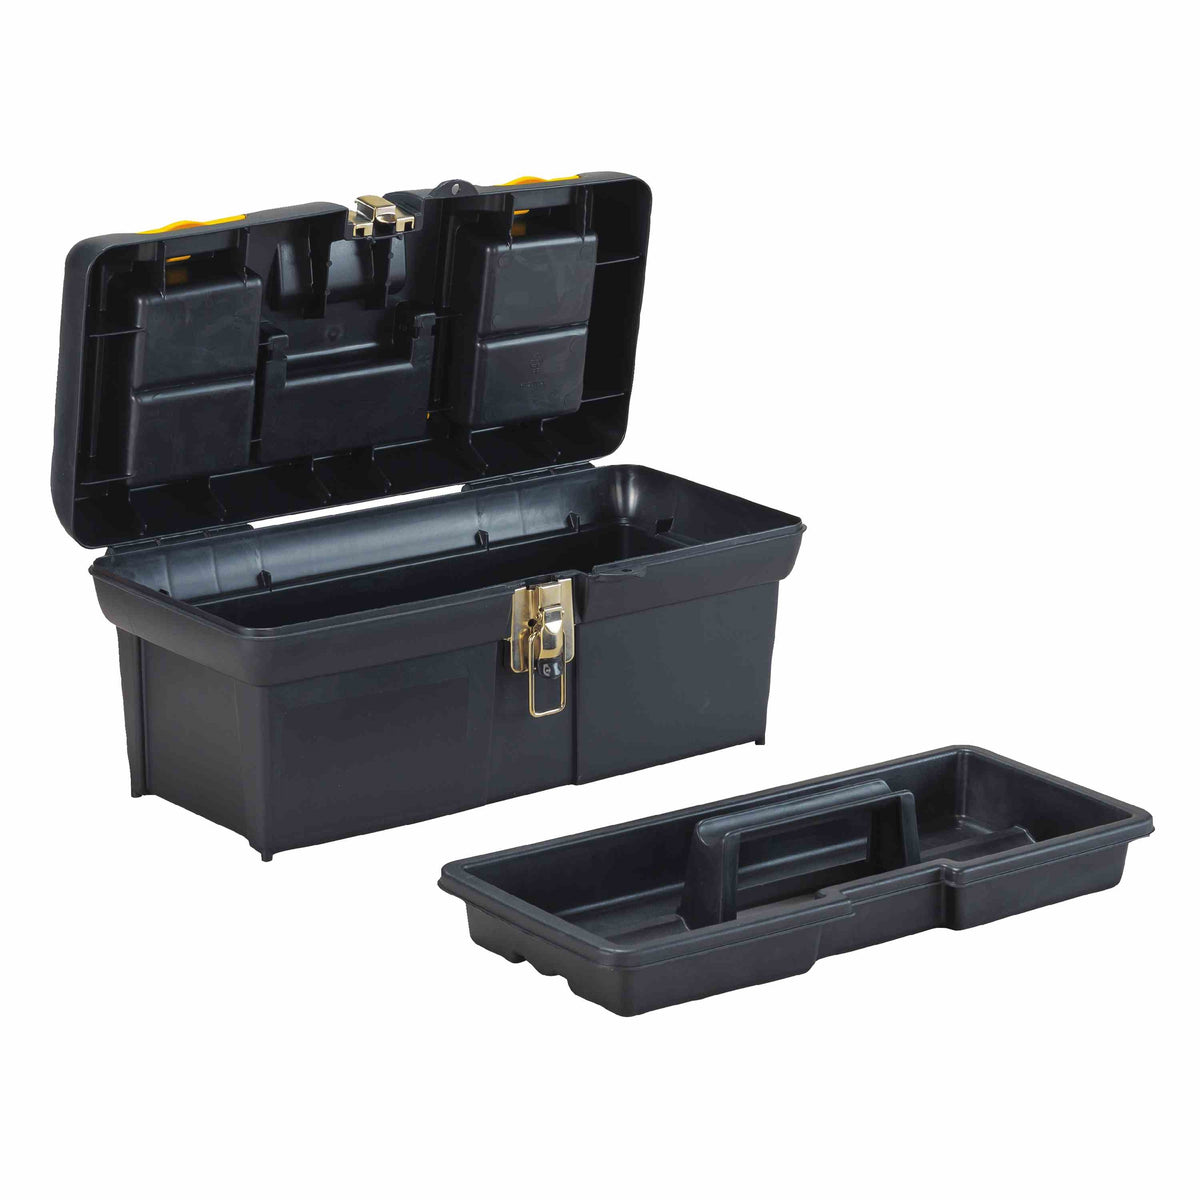 Stanley 016013R Series 2000 Toolbox with Tray, 16"